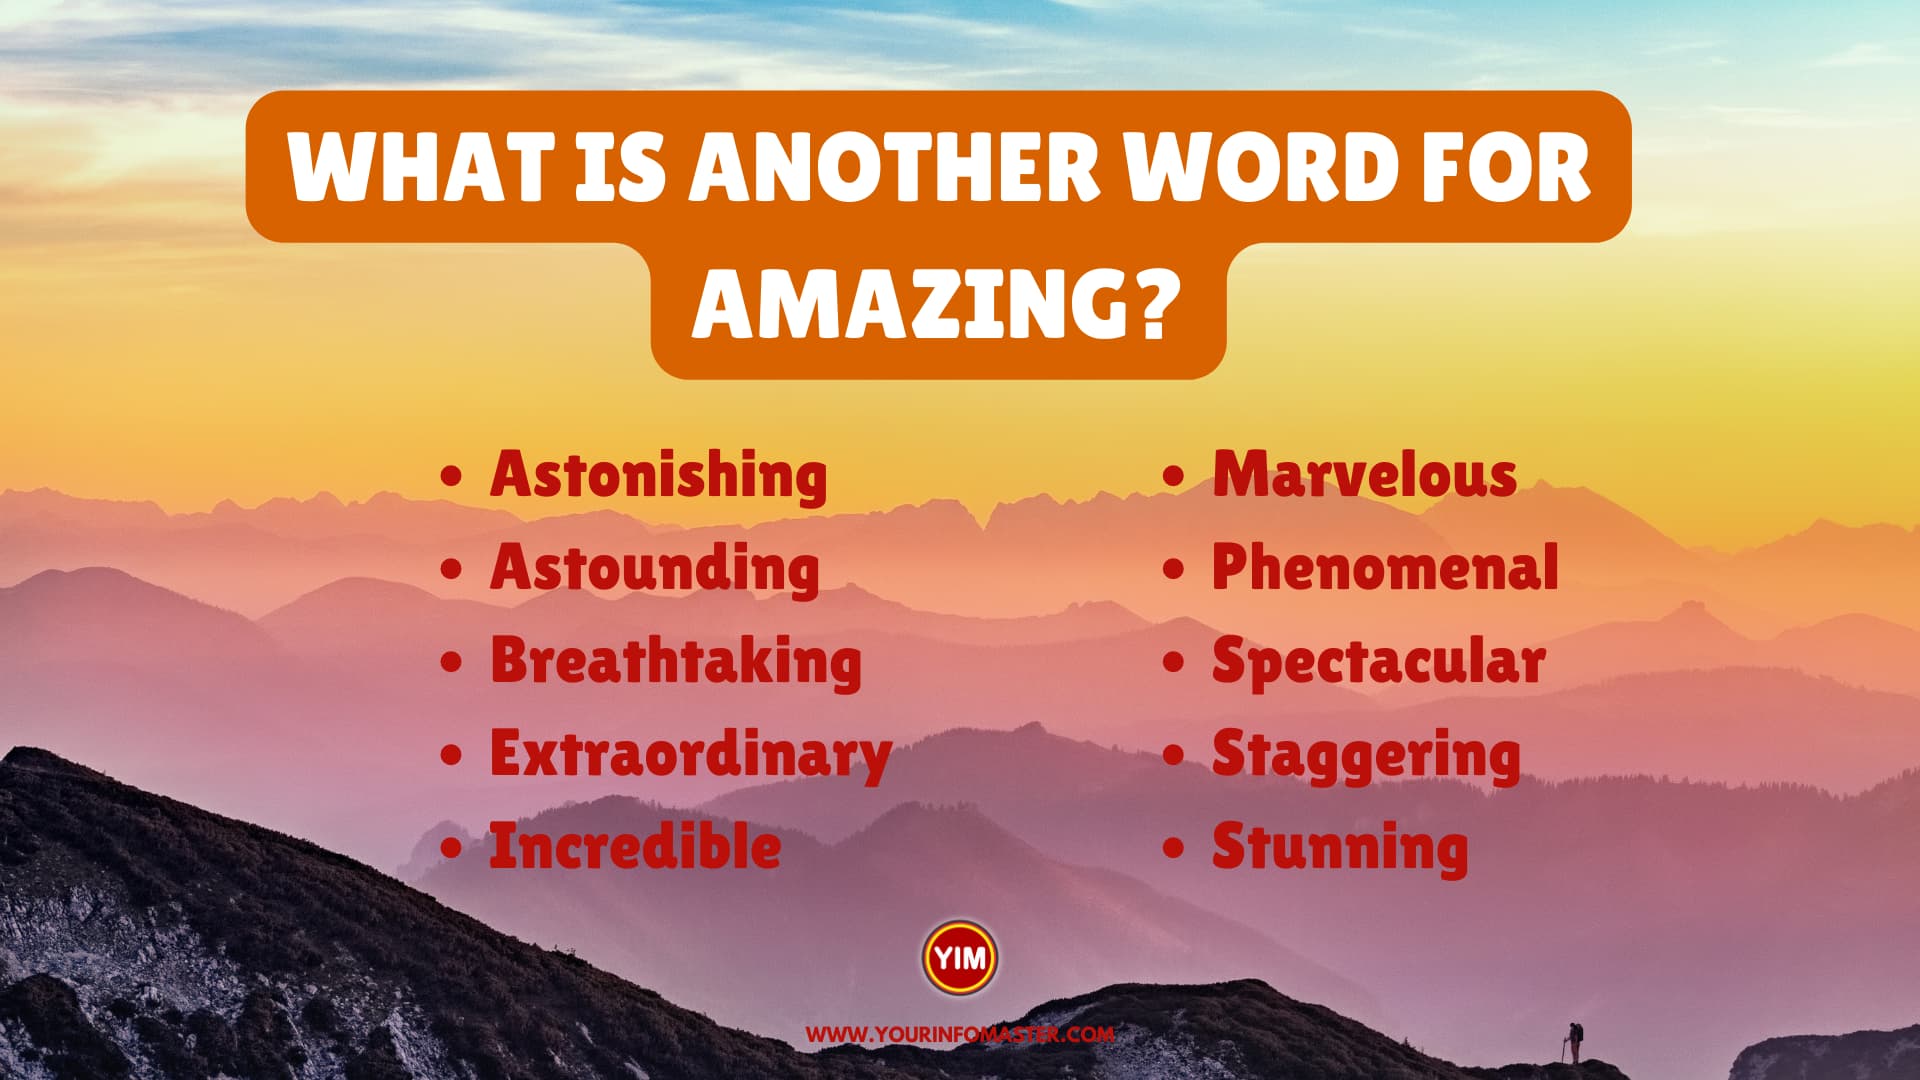 What is another word for Amazing